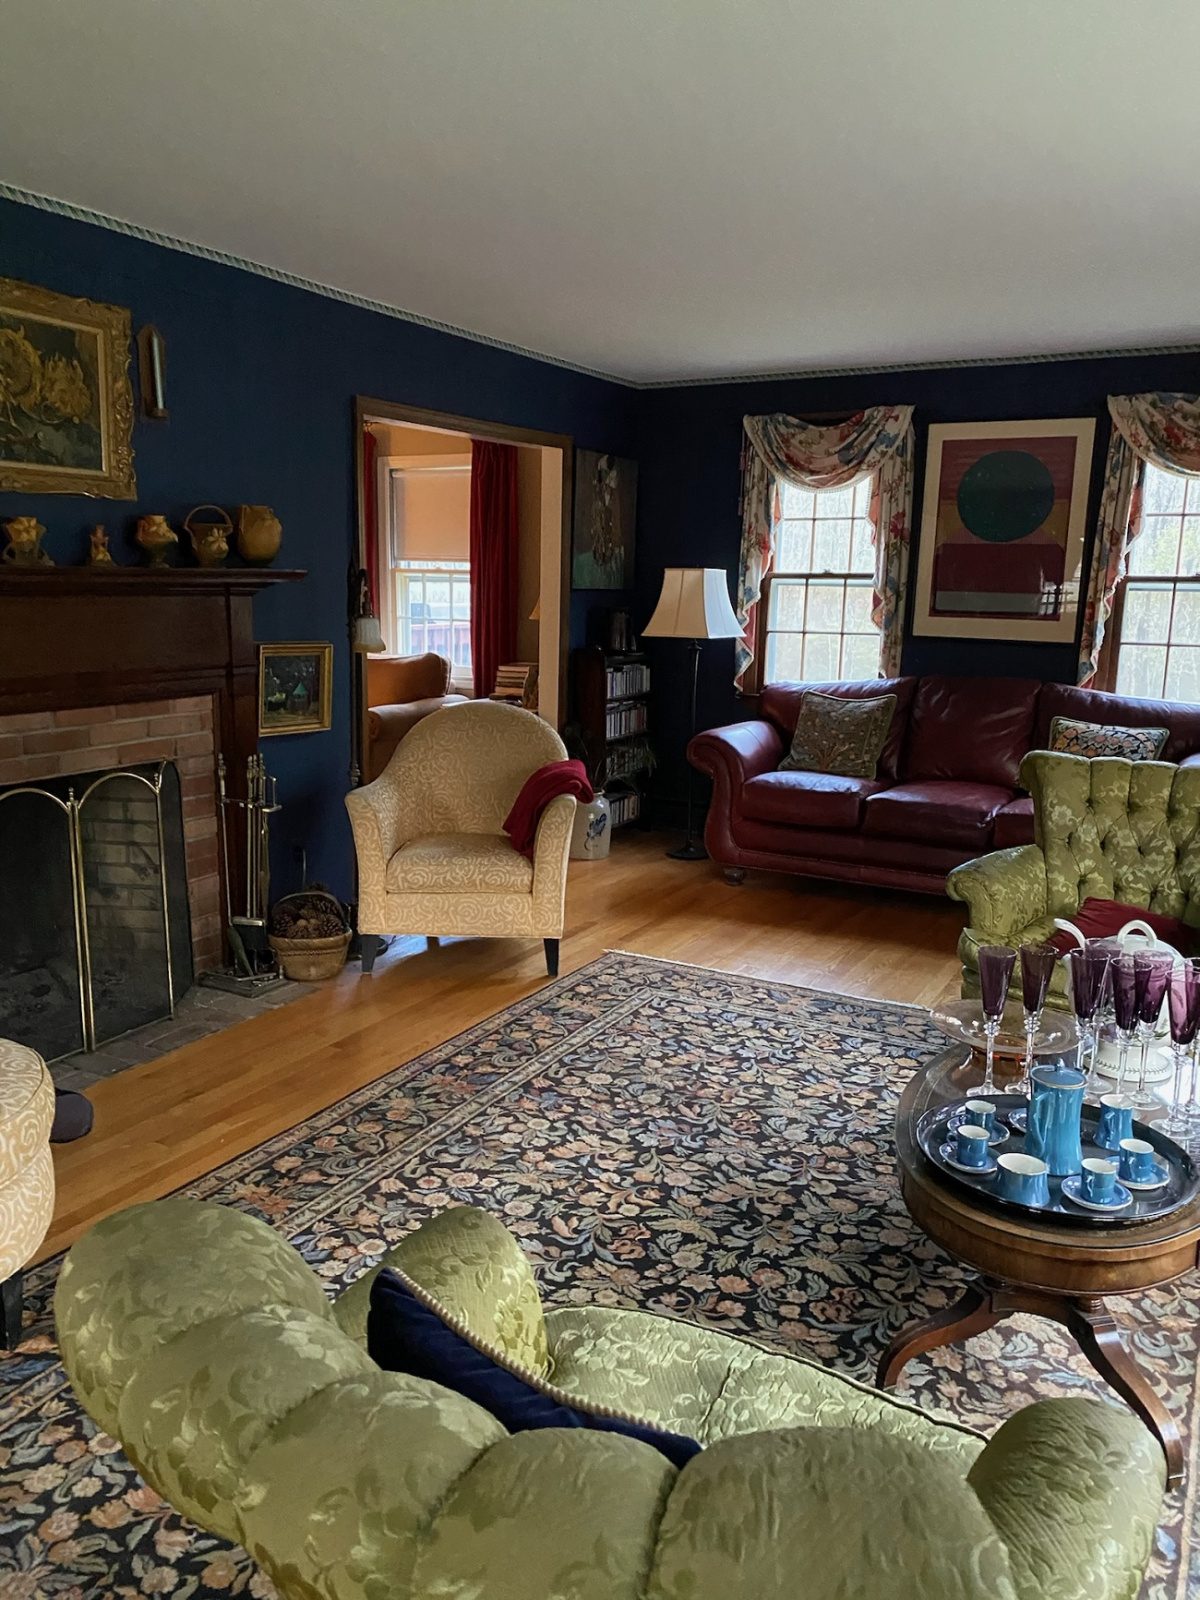 A living room space with dark blue walls and dark furnishings before being redesigned and staged